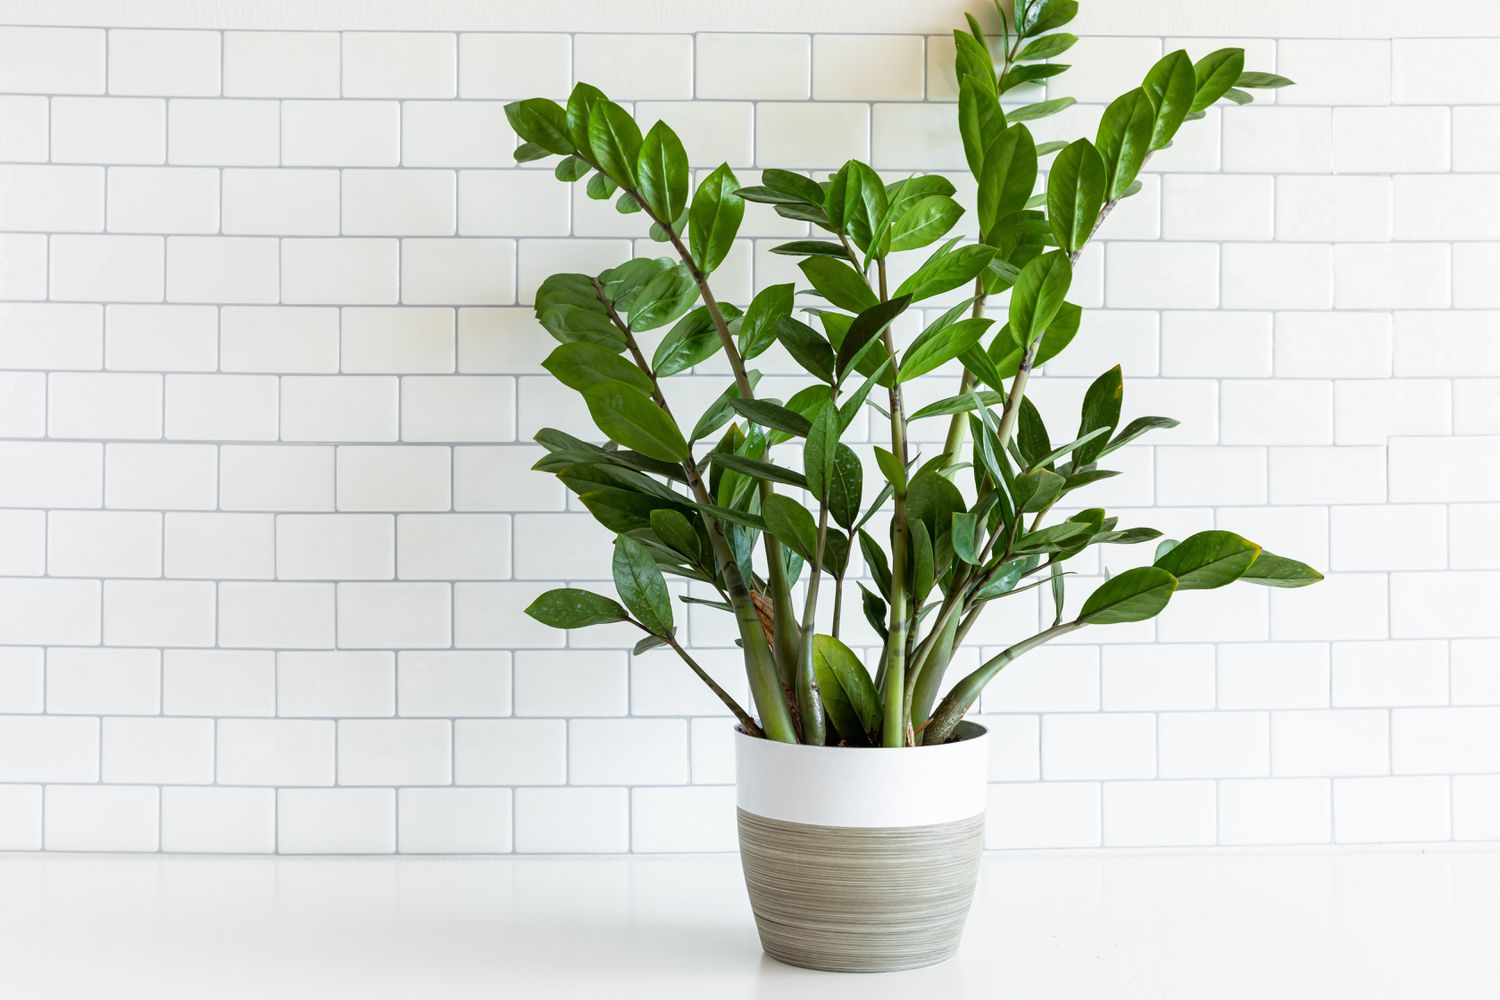 Zenzi ZZ plant with wide, oval-shaped leaves growing from white and gray pot